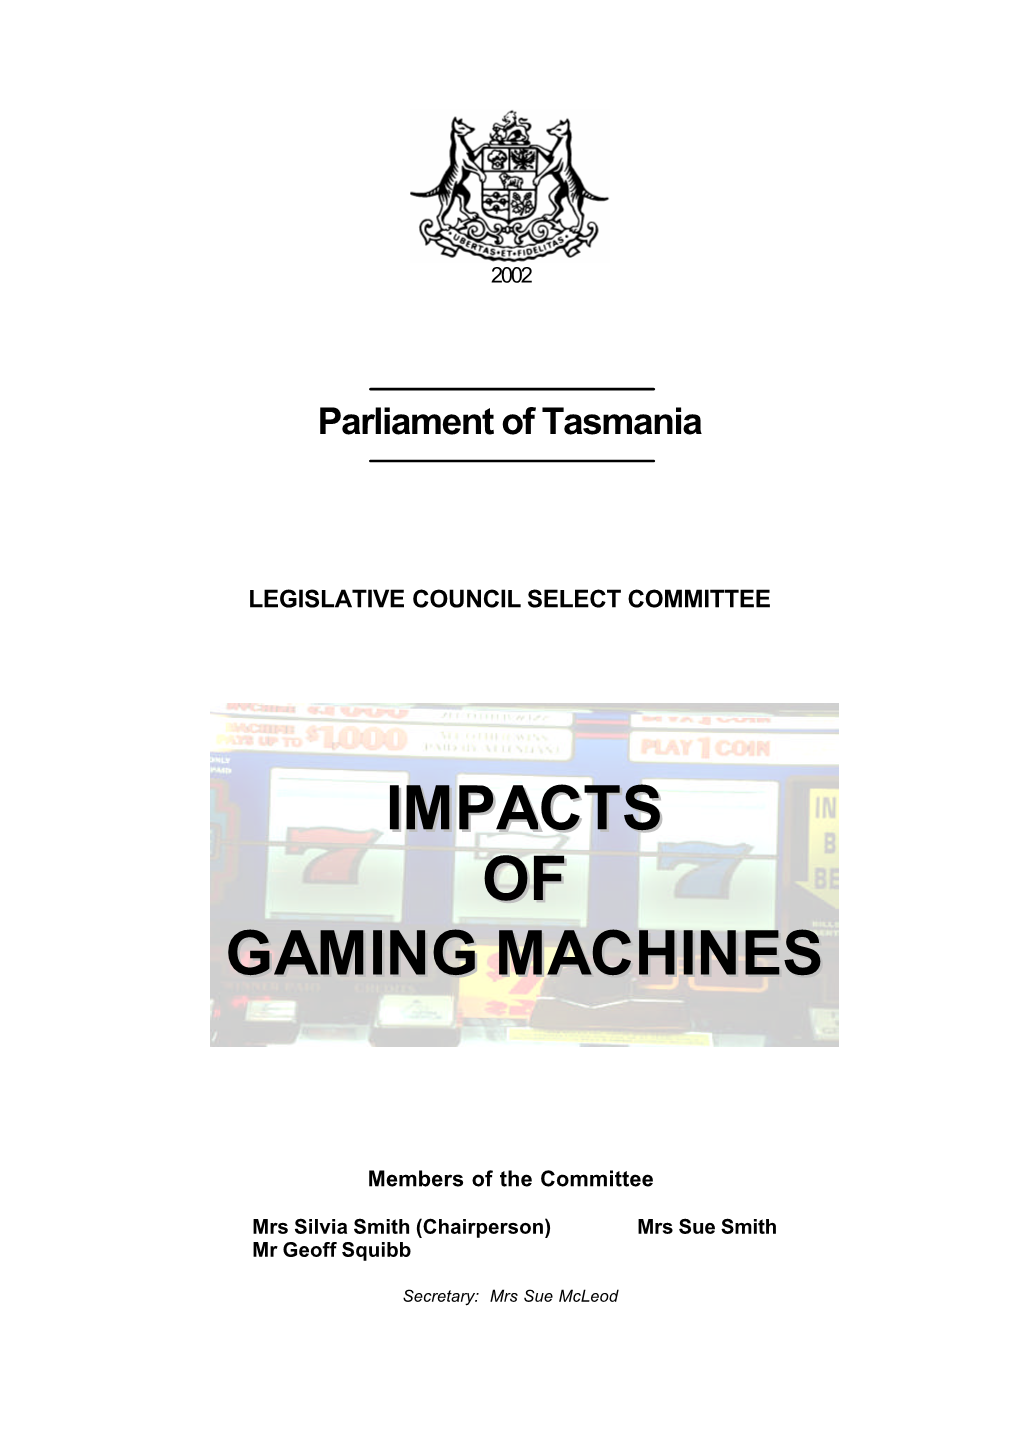 Impacts of Gaming Machines – Terms of Reference